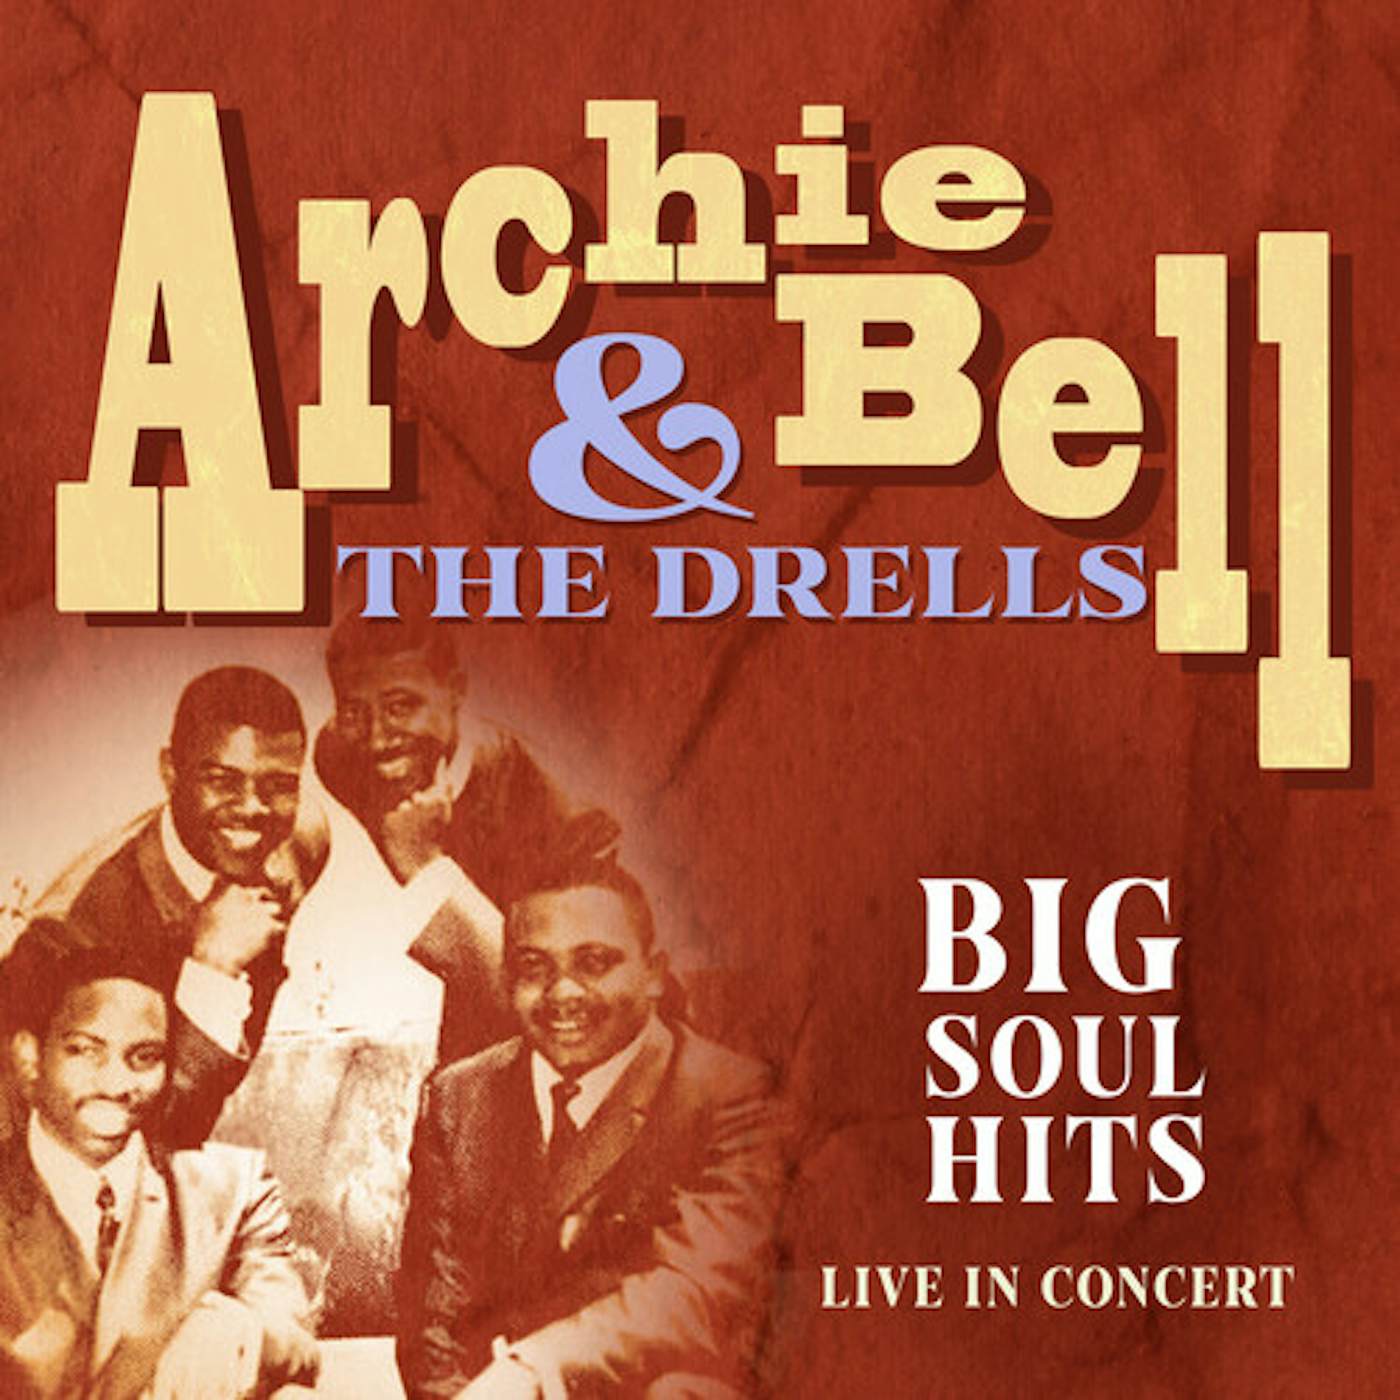 Archie Bell & The Drells BIG SOUL HITS LIVE IN CONCERT CD